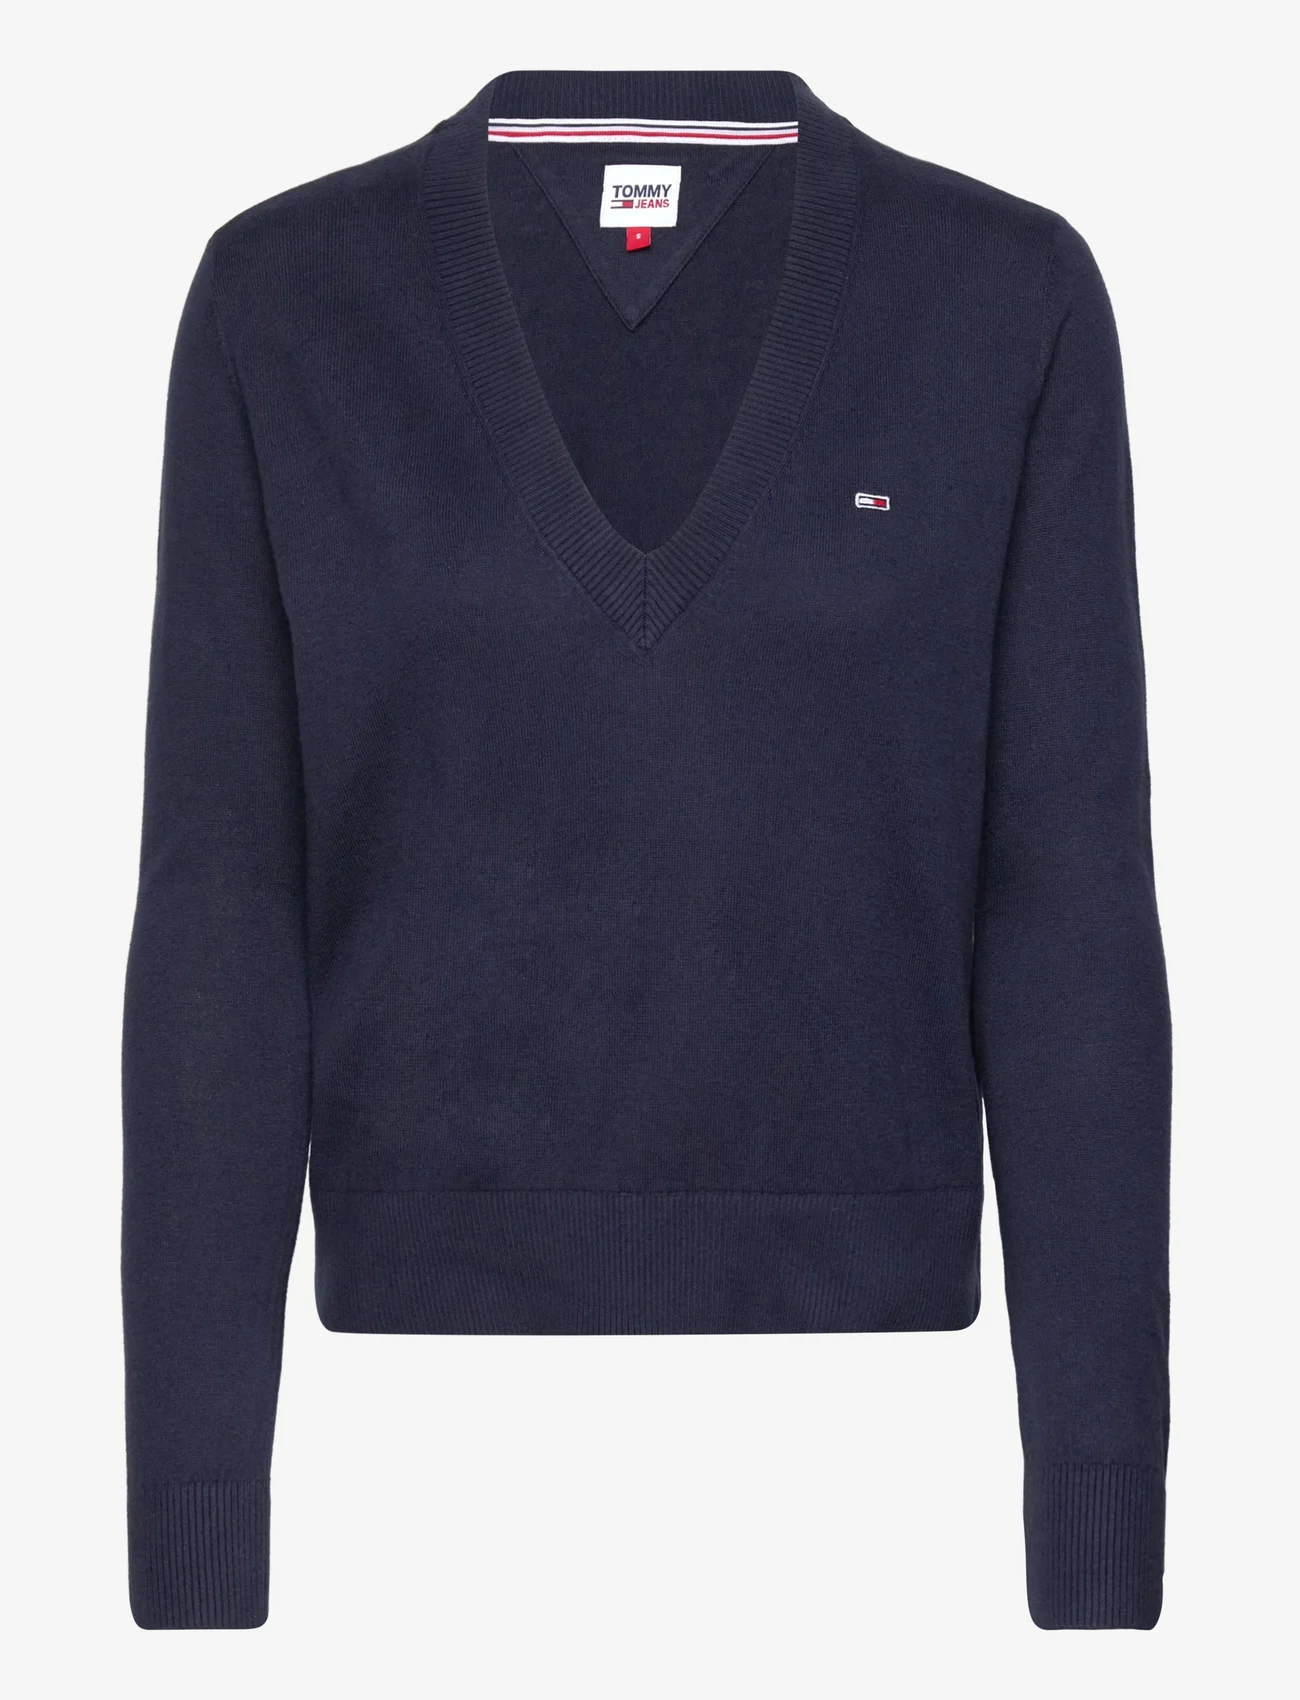 Tommy Jeans - TJW ESSENTIAL VNECK SWEATER - gensere - twilight navy - 0